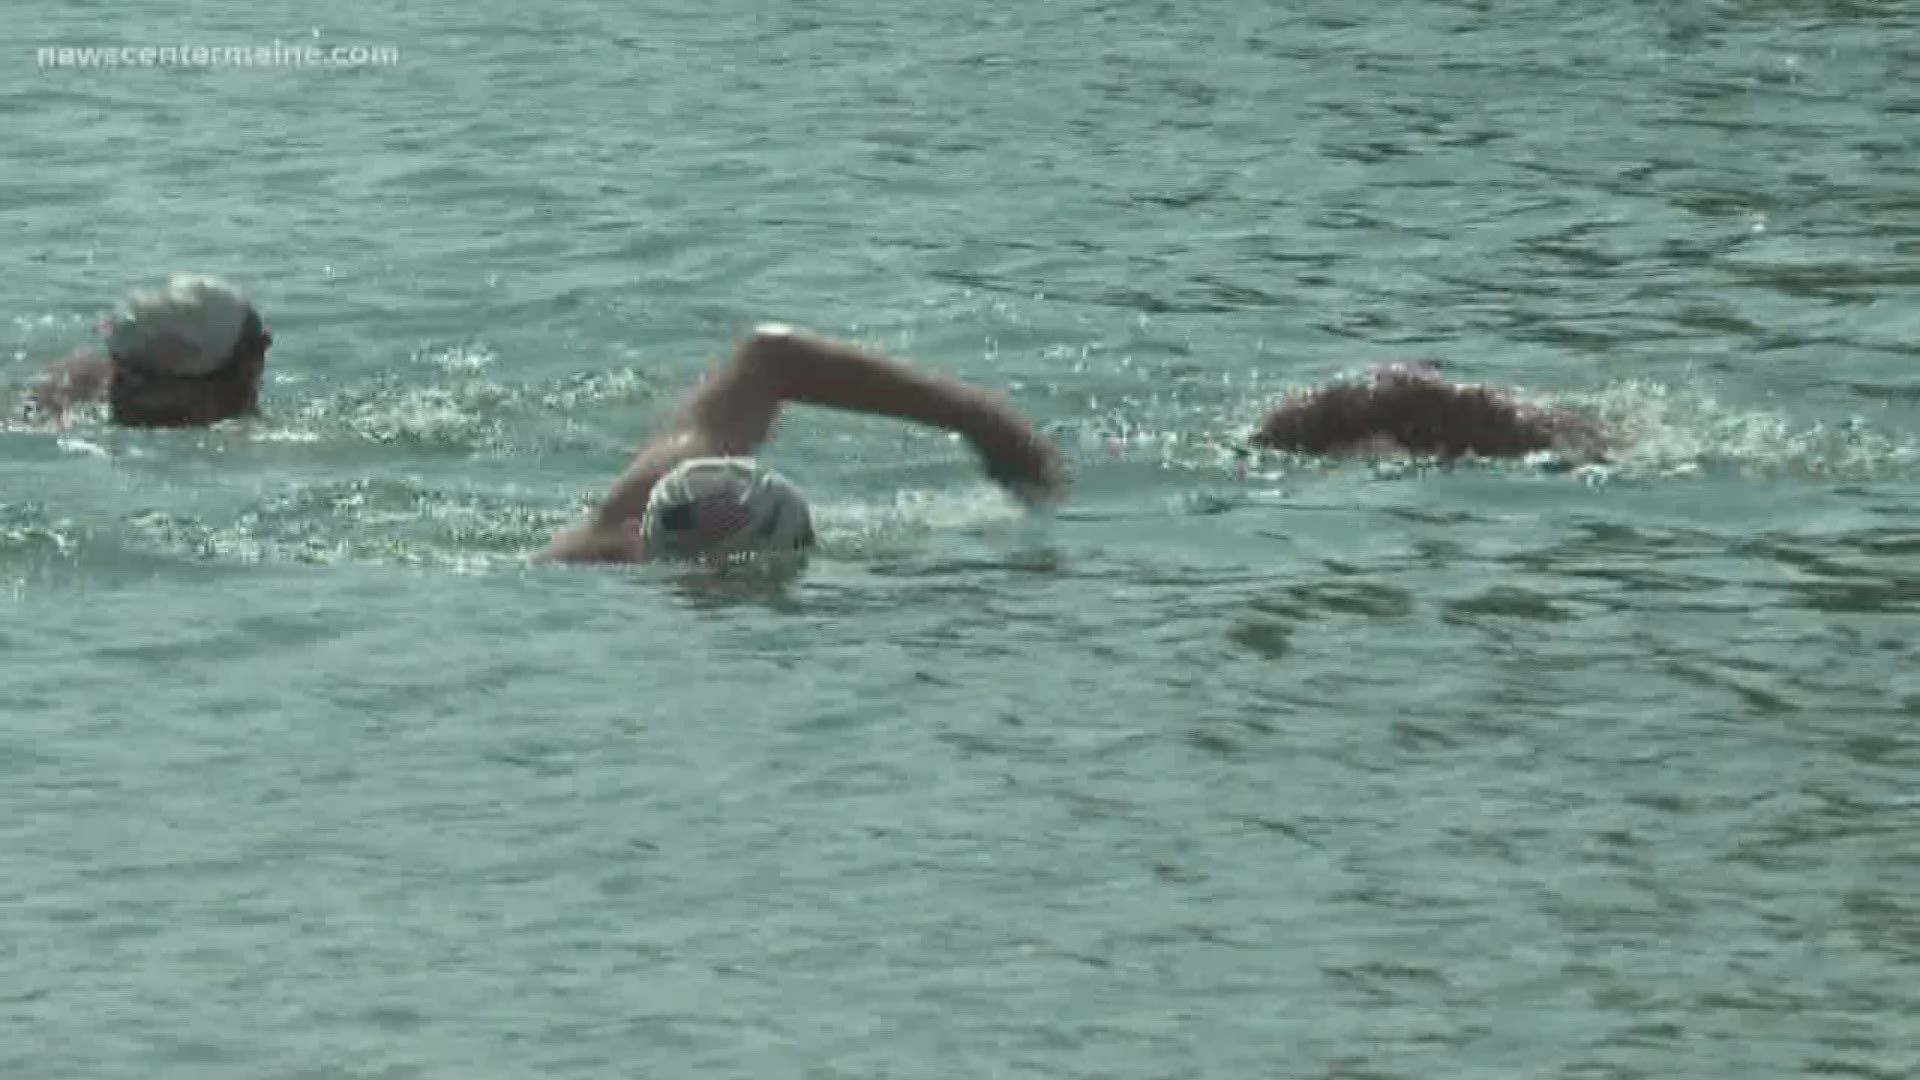 Five Navy SEALs swam 16 miles from Long Lake in Bridgton to Sebago Lake in Casco. Their annual swim has raised $500,000 in five years for Camp Sunshine.